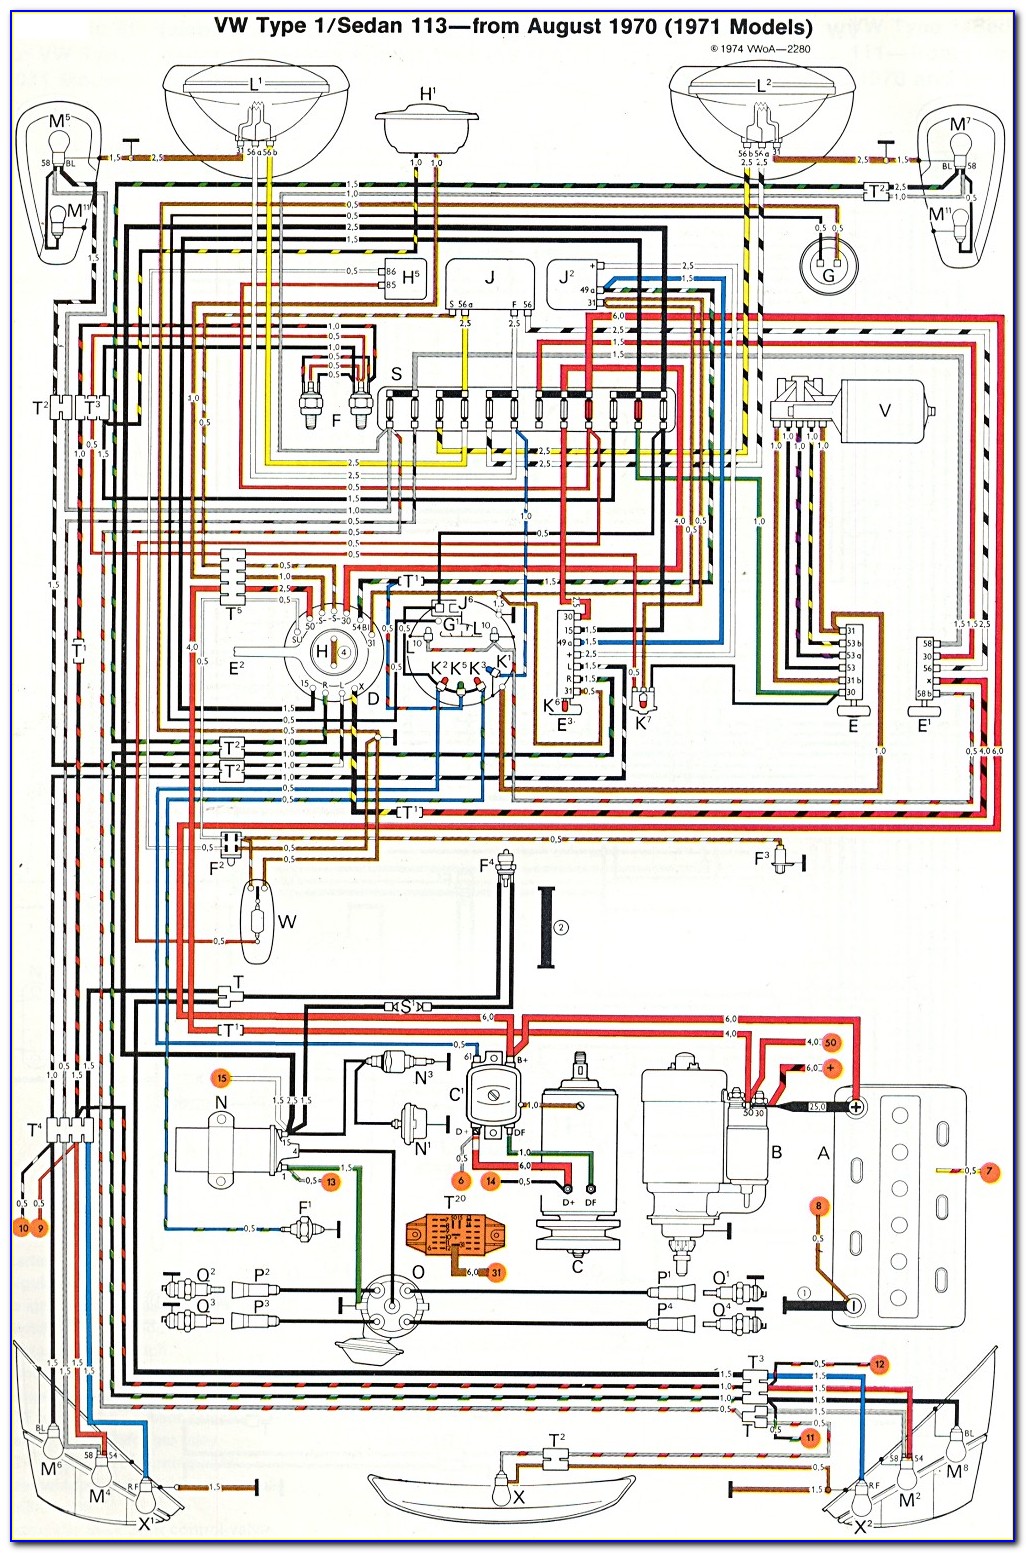 1971 Vw Super Beetle Ignition Switch Wiring Diagram